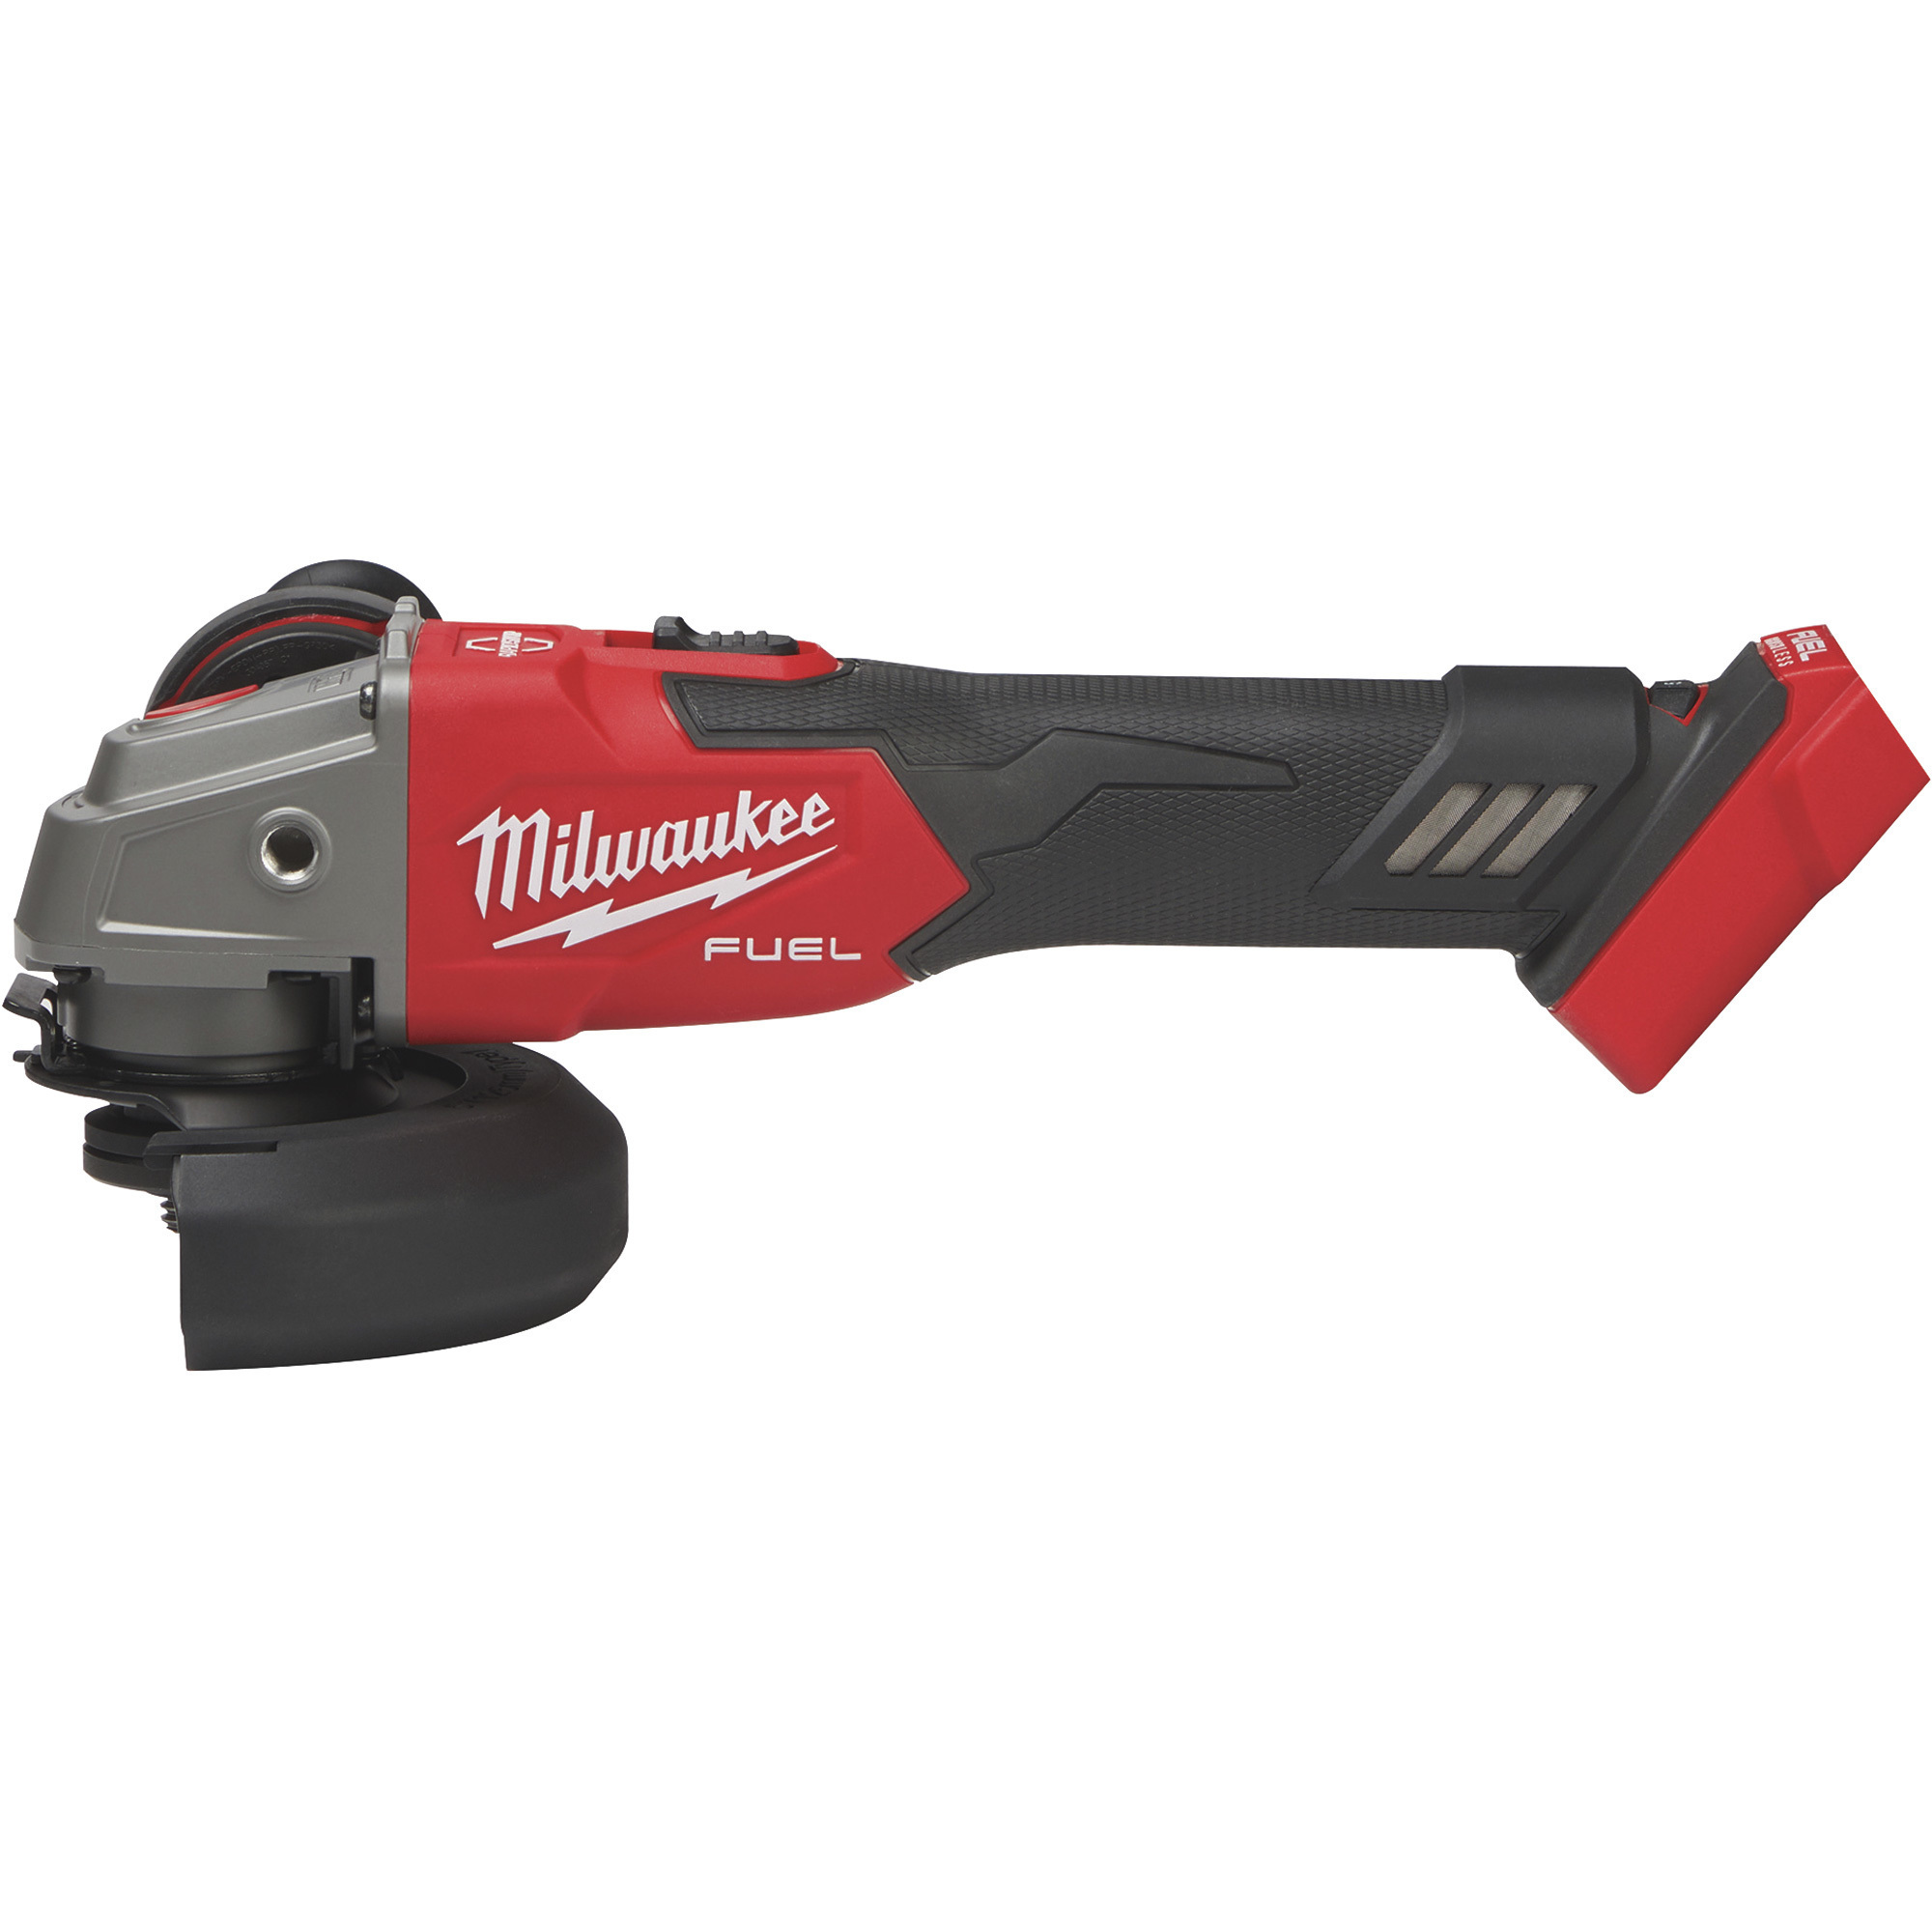 Milwaukee M18 FUEL 5Inch 4-1/2Inch / 5Inch Variable-Speed Braking Angle Grinder, Tool Only, Slide Switch Lock-On, Model 2889-20